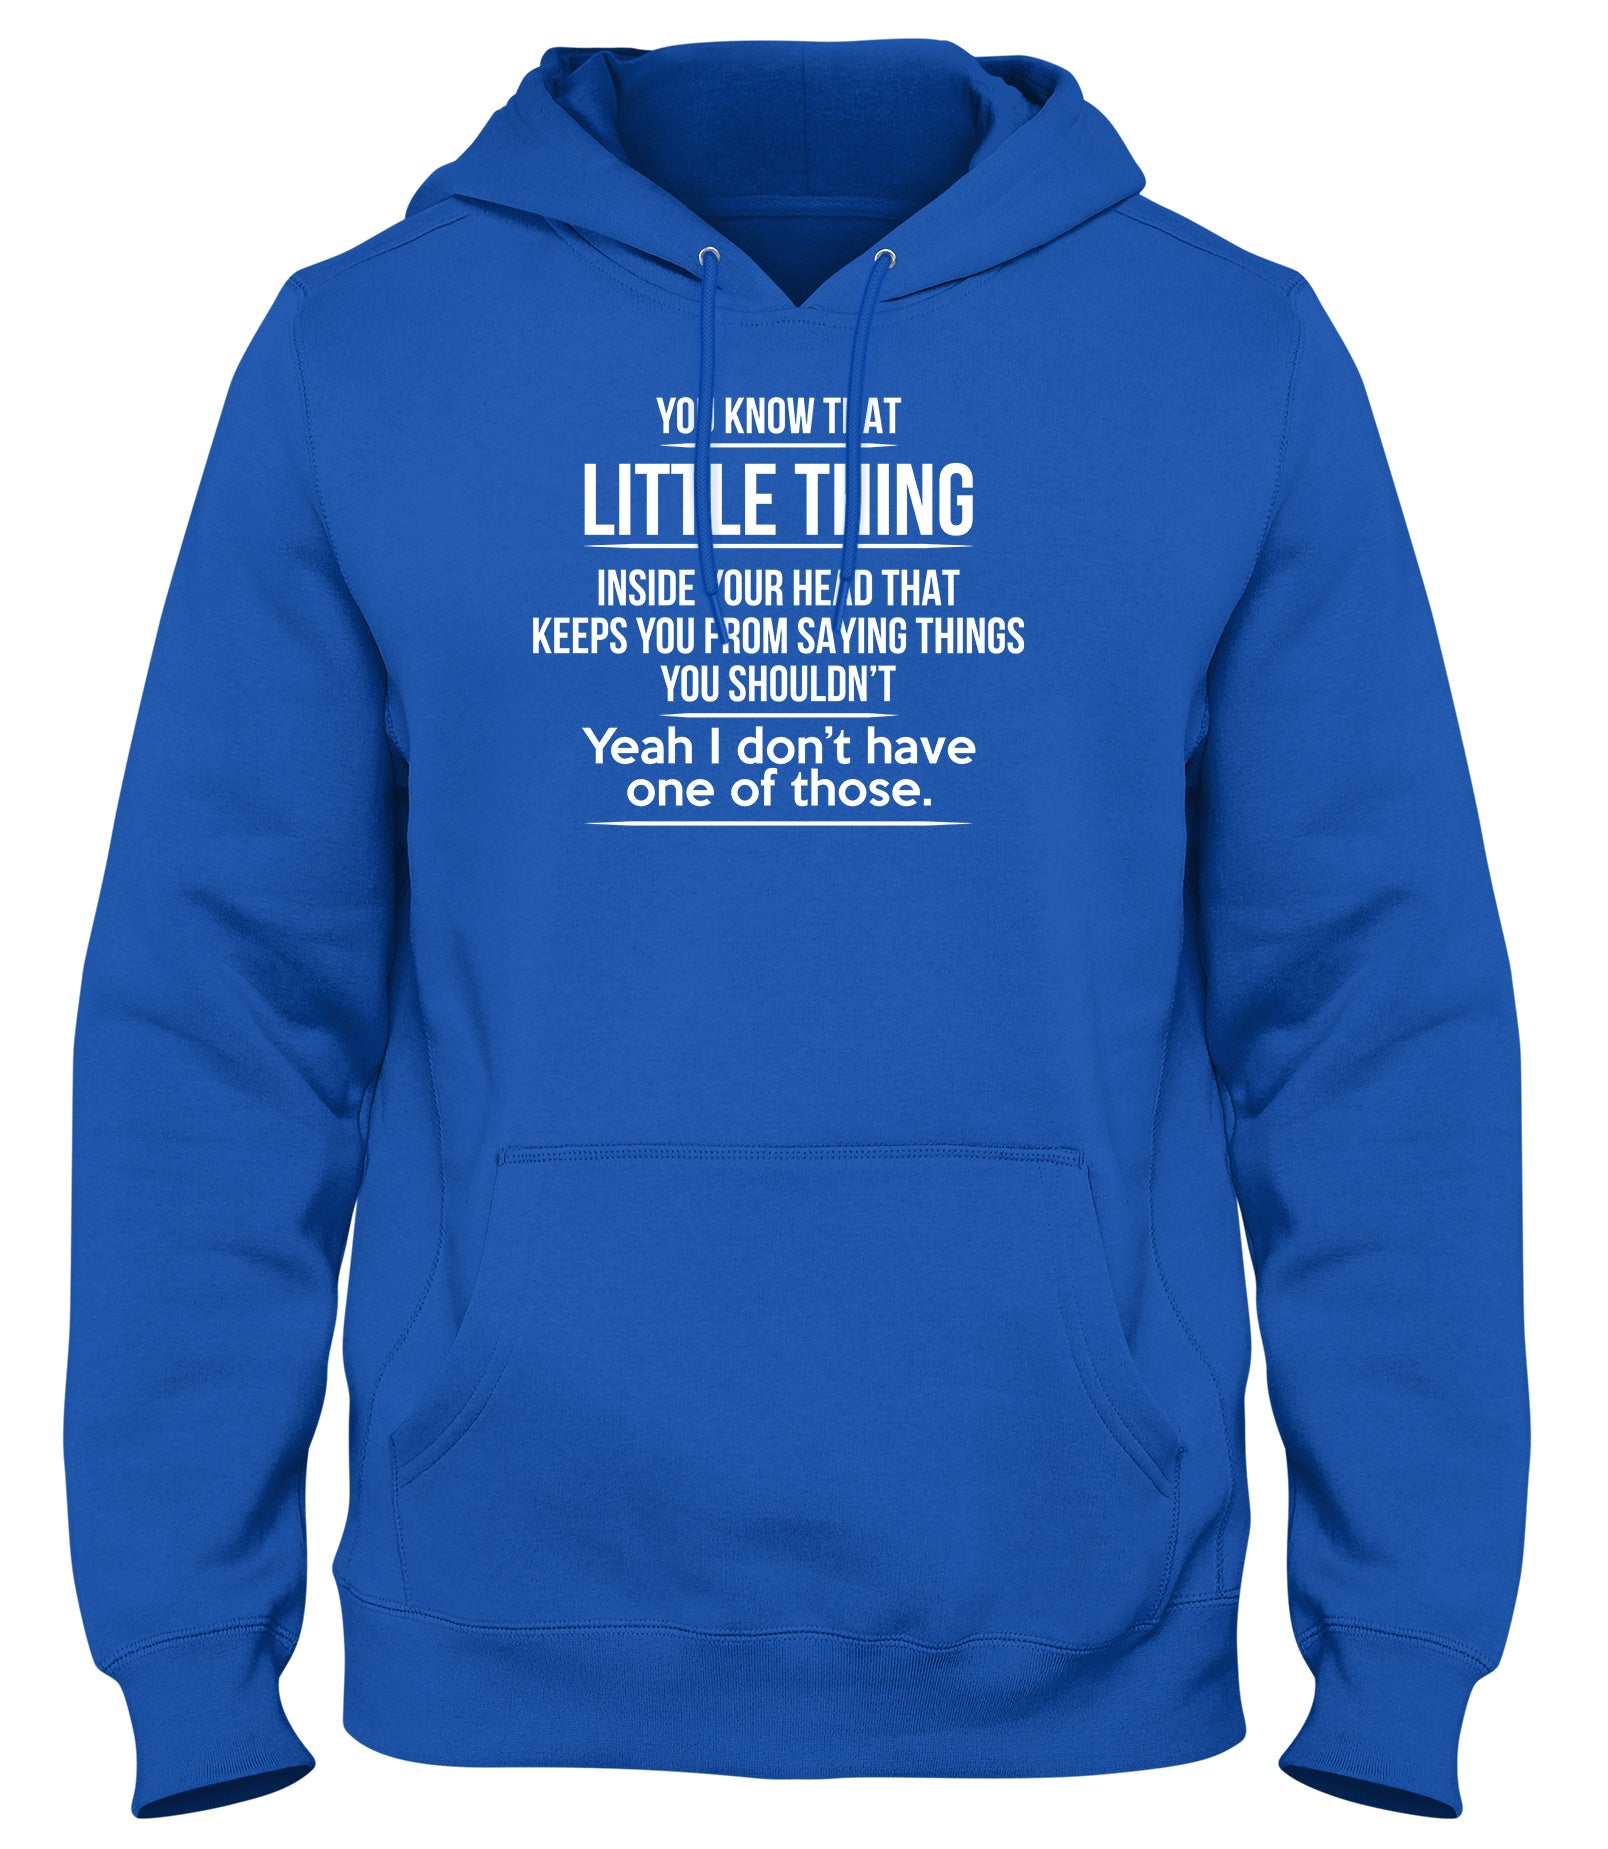 THAT LITTLE THING INSIDE YOUR HEAD THAT KEEPS YOU FROM SAYING THINGS YOU SHOULDN'T MENS LADIES WOMENS UNISEX HOODIE